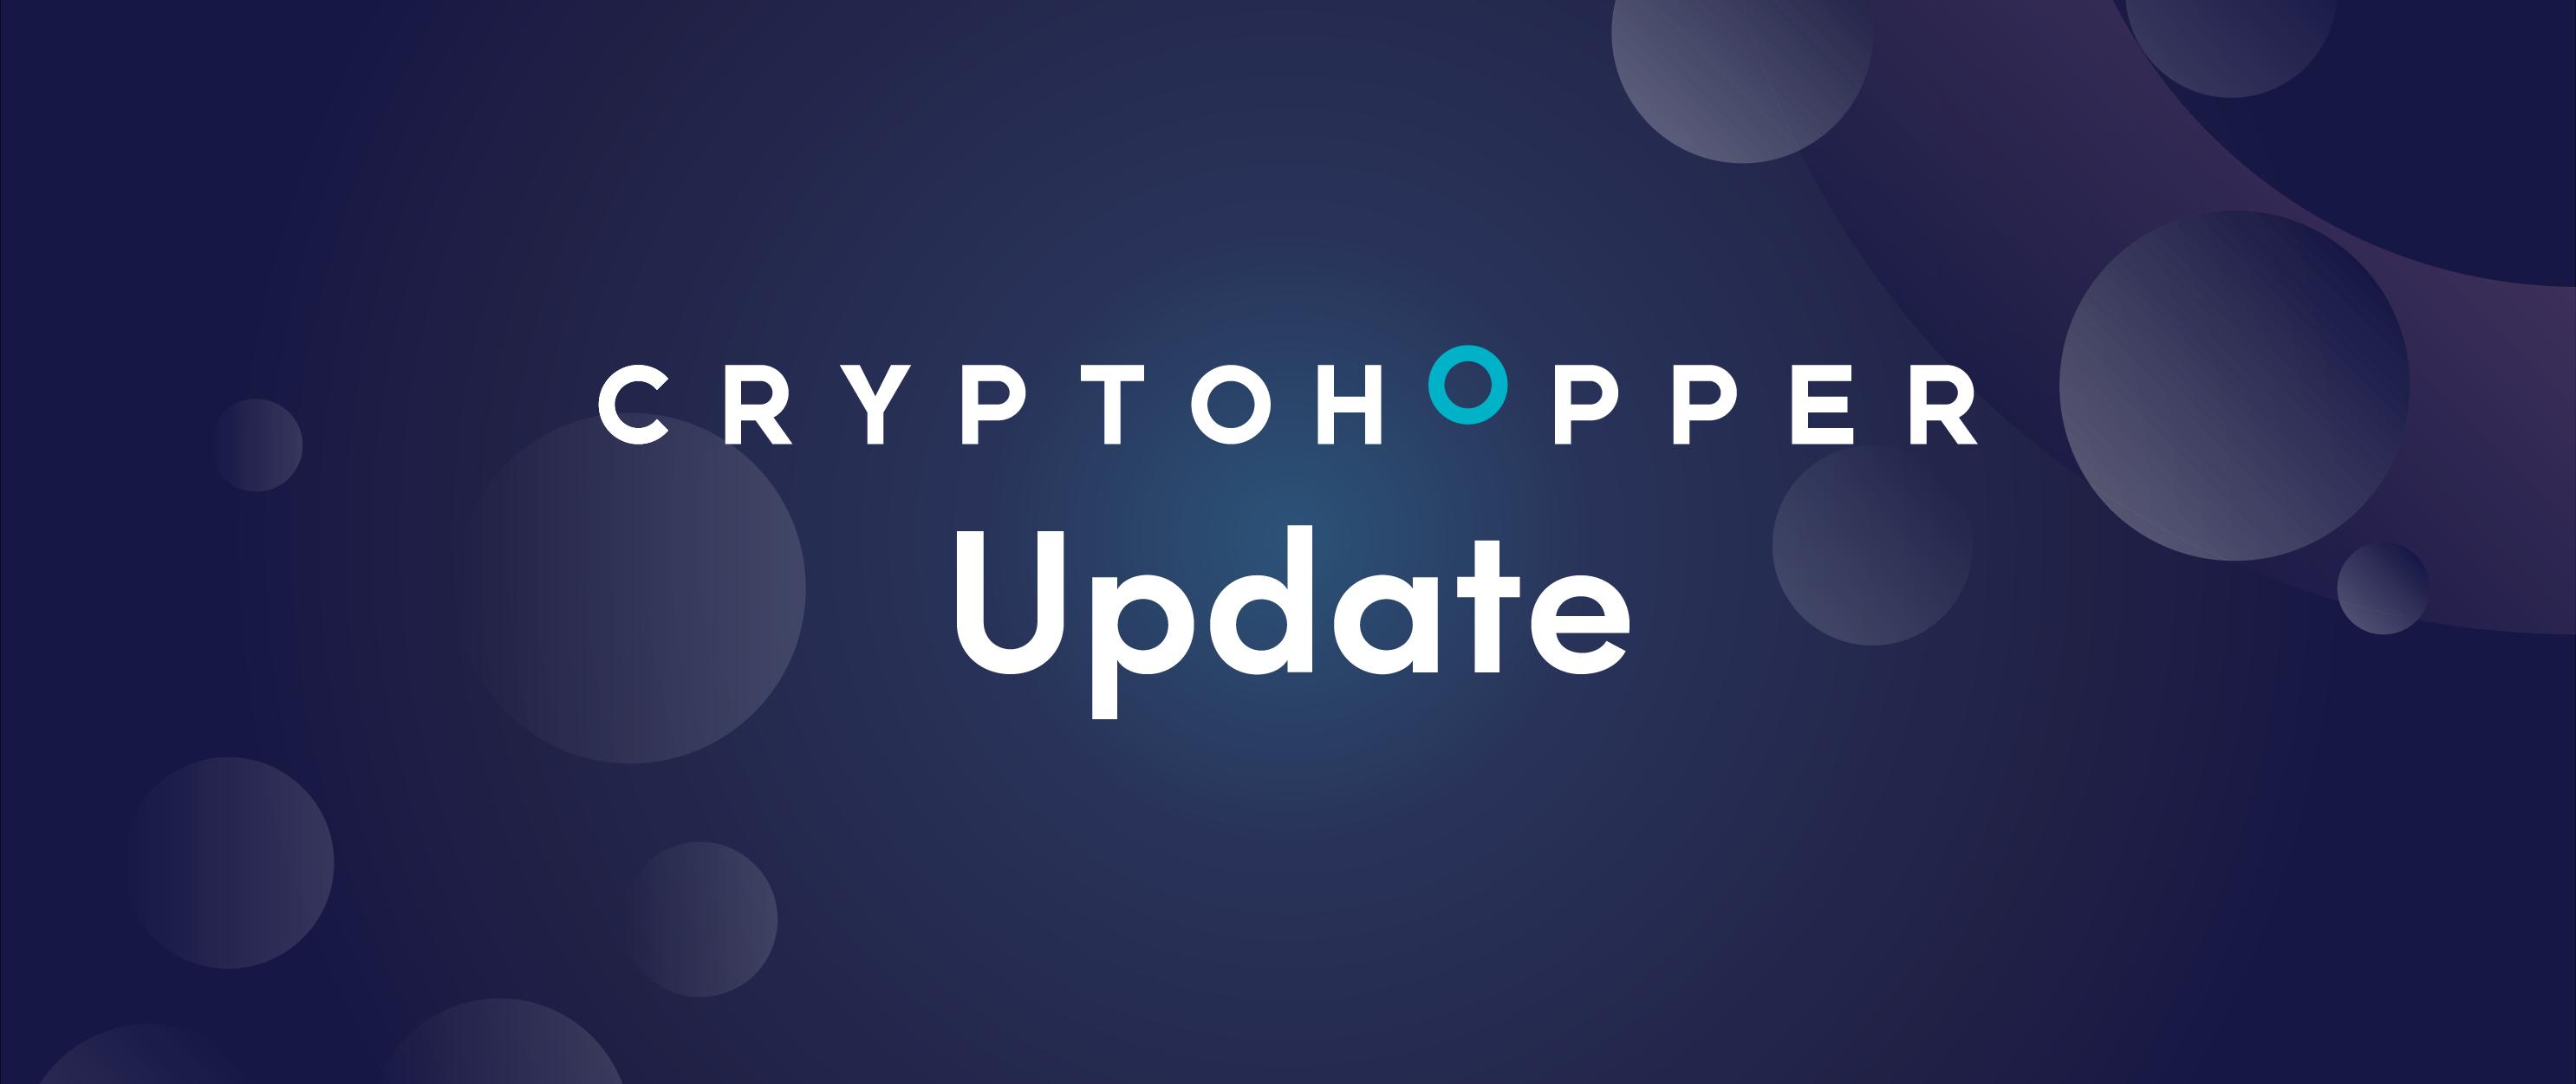 Cryptohopper discontinues the CryptoTweeter